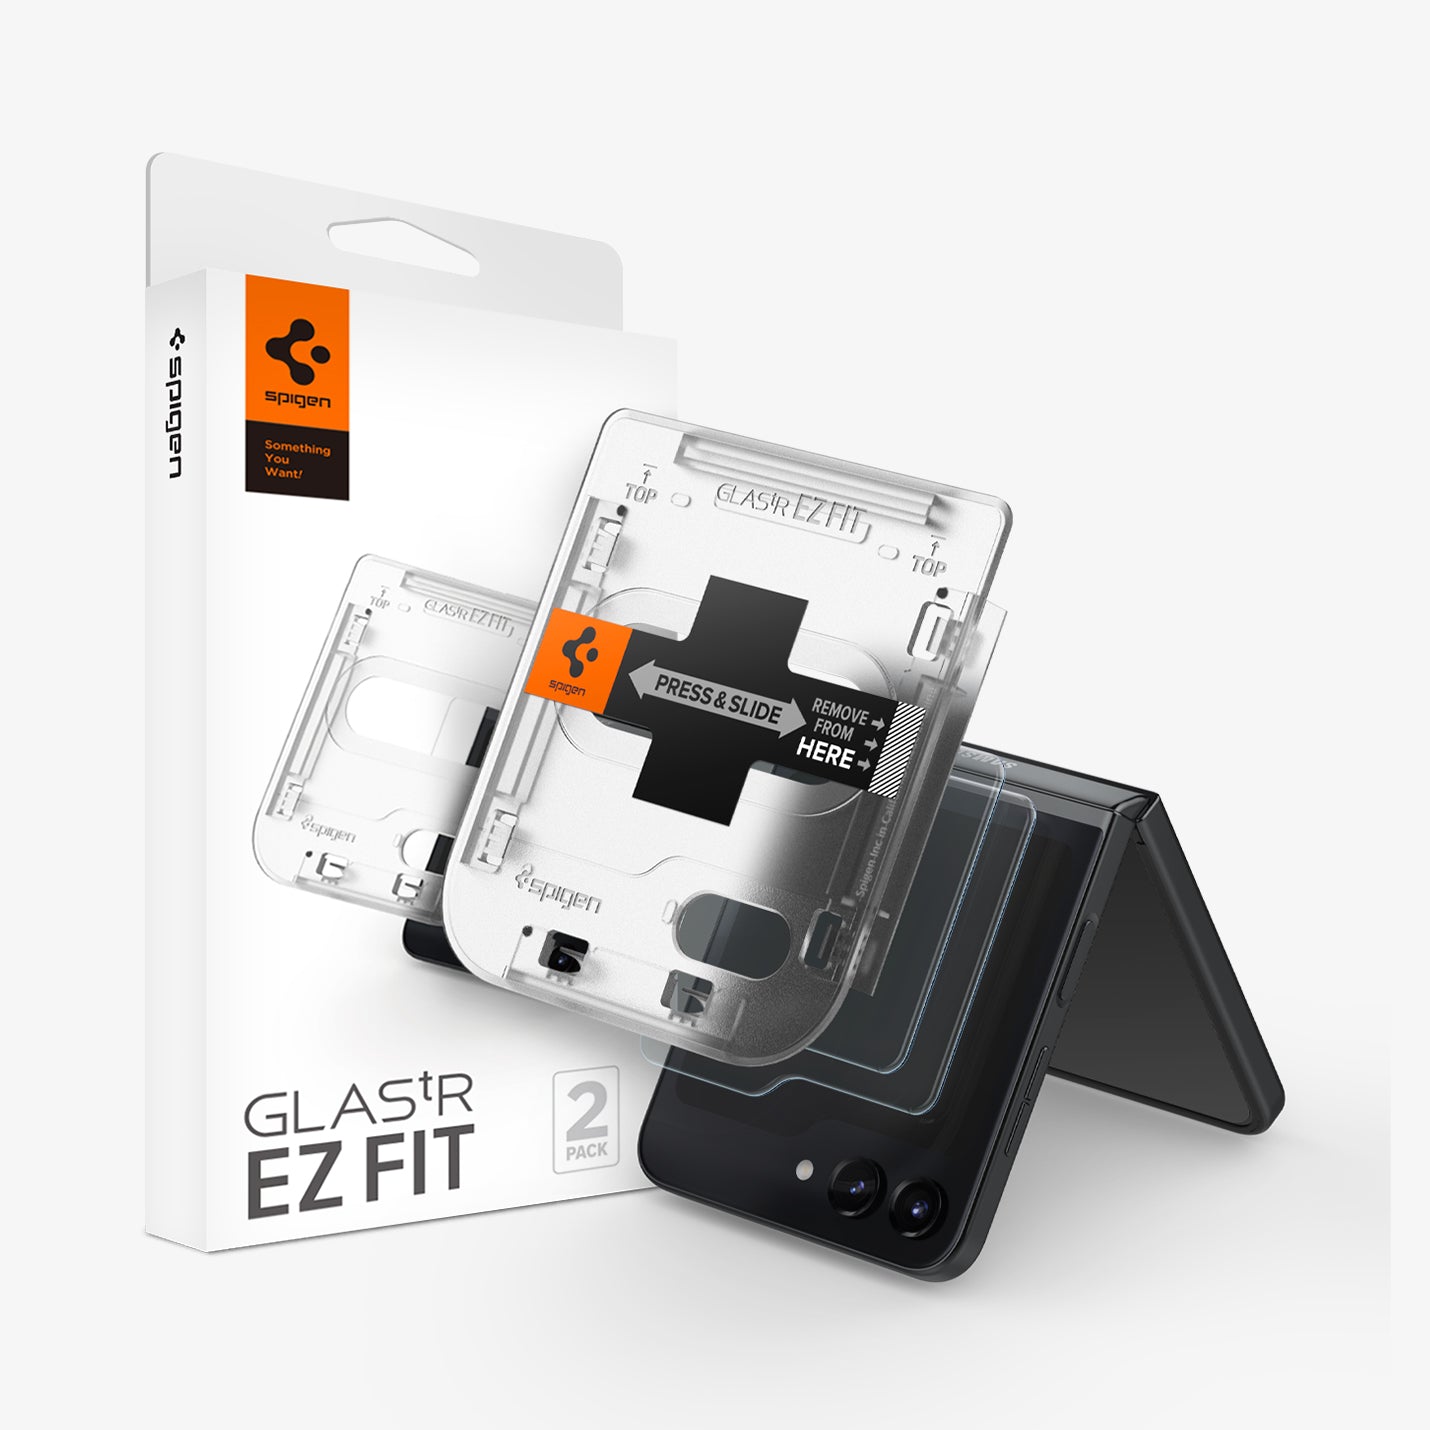 AGL06525 - Galaxy Z Flip 5 Series Screen Protector EZ FIT GLAS.tR showing the device, two screen protectors, ez fit tray and packaging